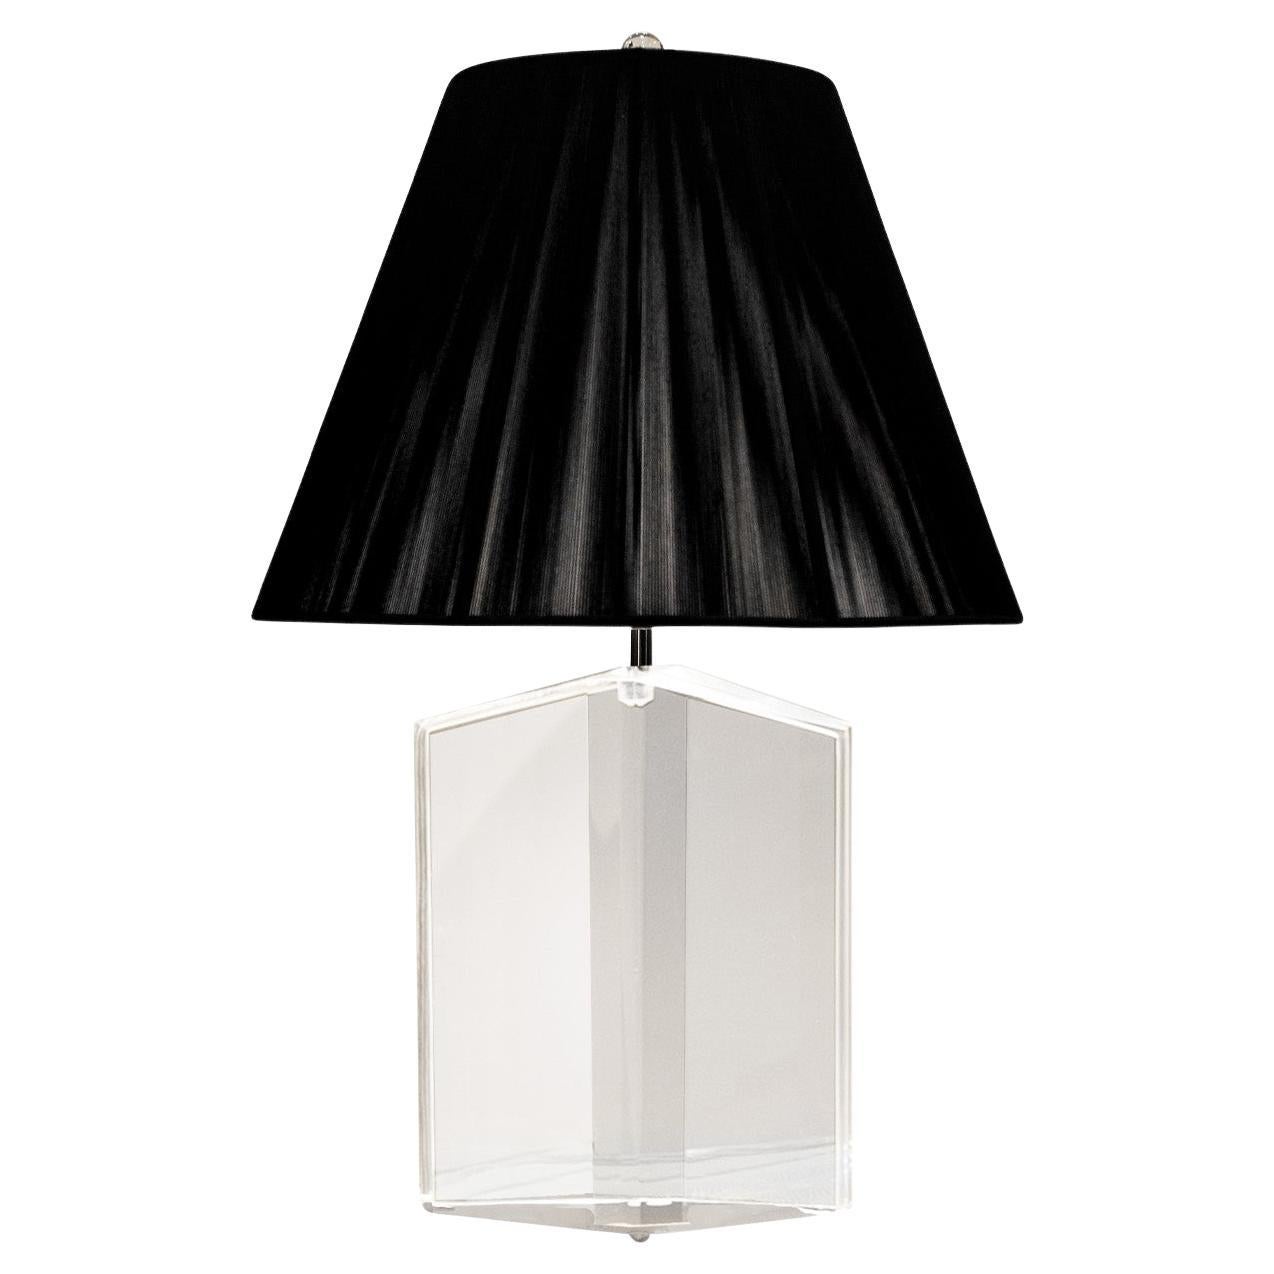 Les Prismatiques Tapering Lucite Table Lamp with Chrome Hardware, 1970s